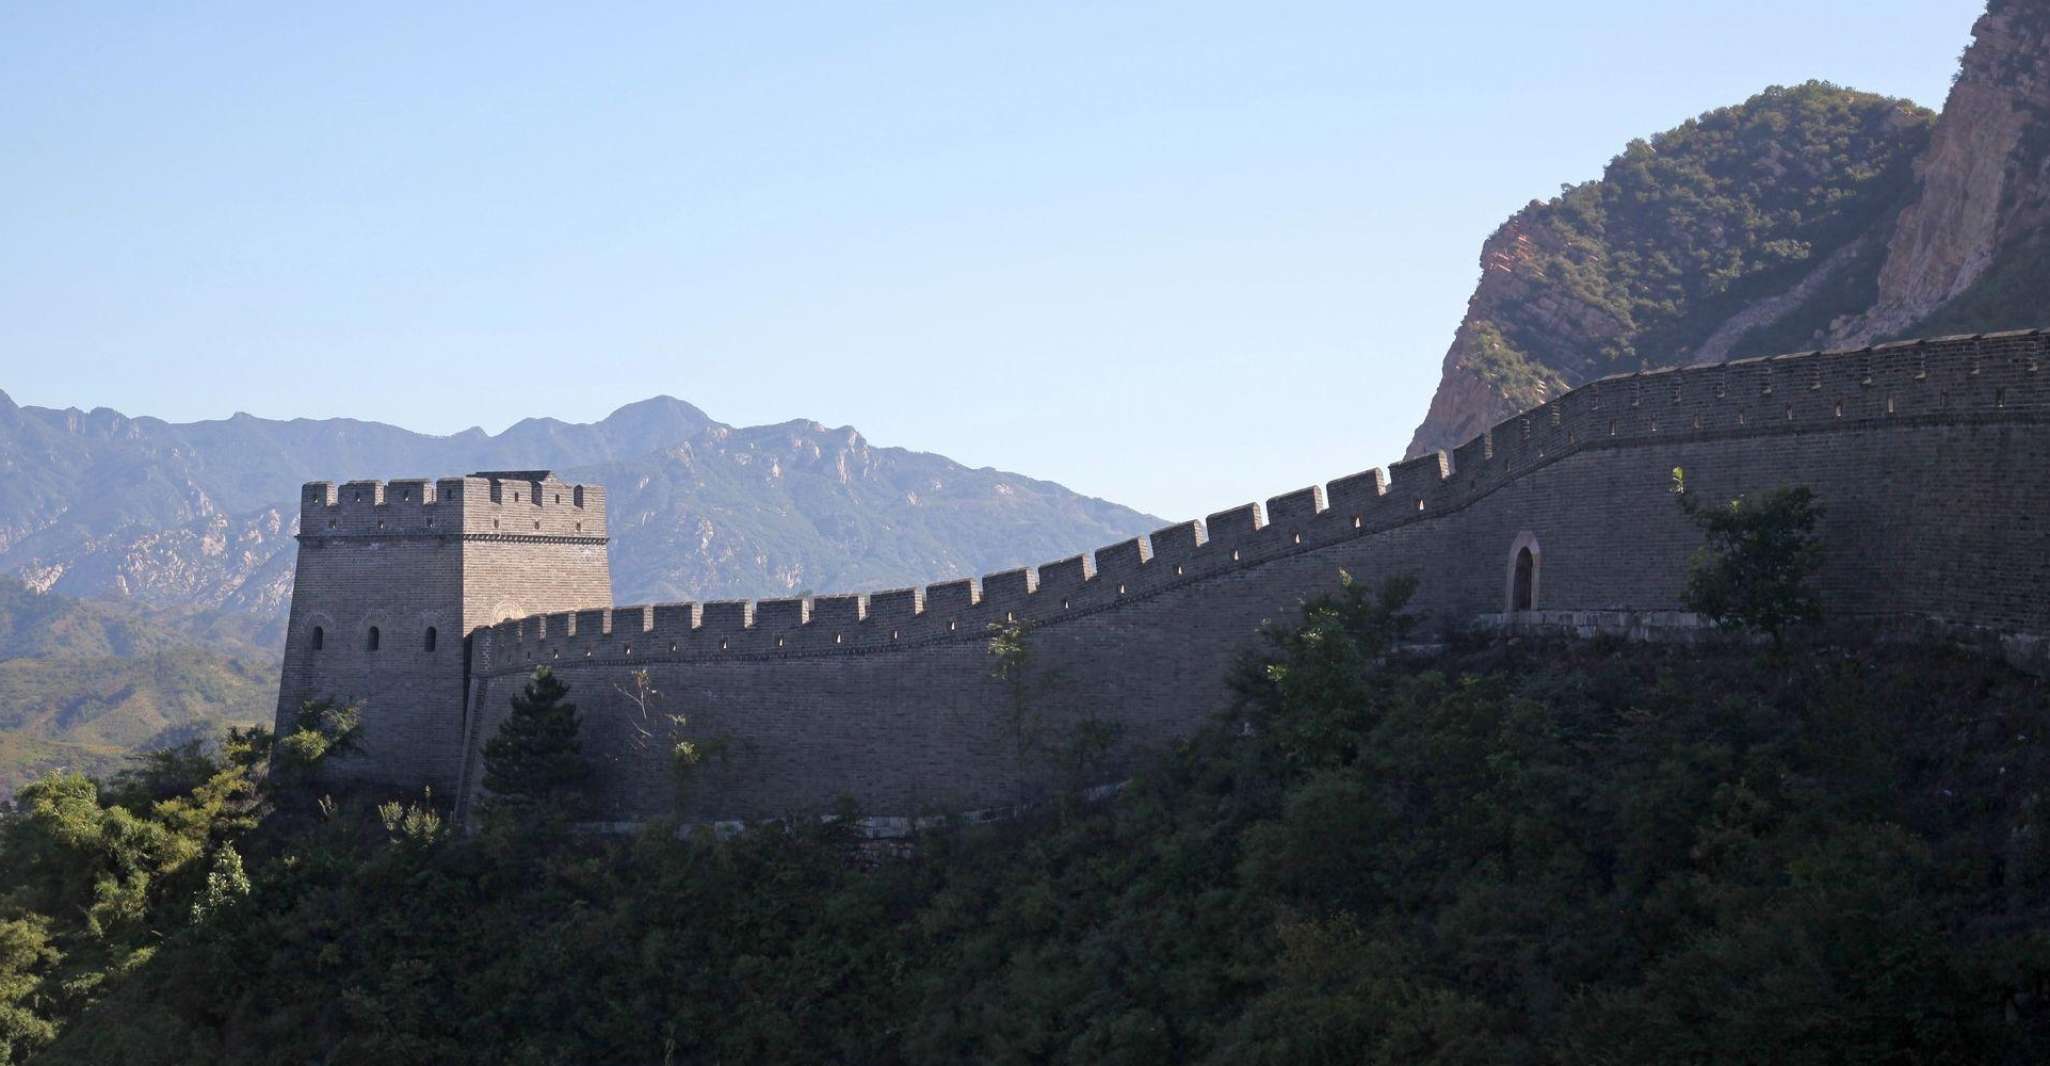 One Day Huangyaguan Great Wall And Qing Tomb Tour Of Beijing - Housity